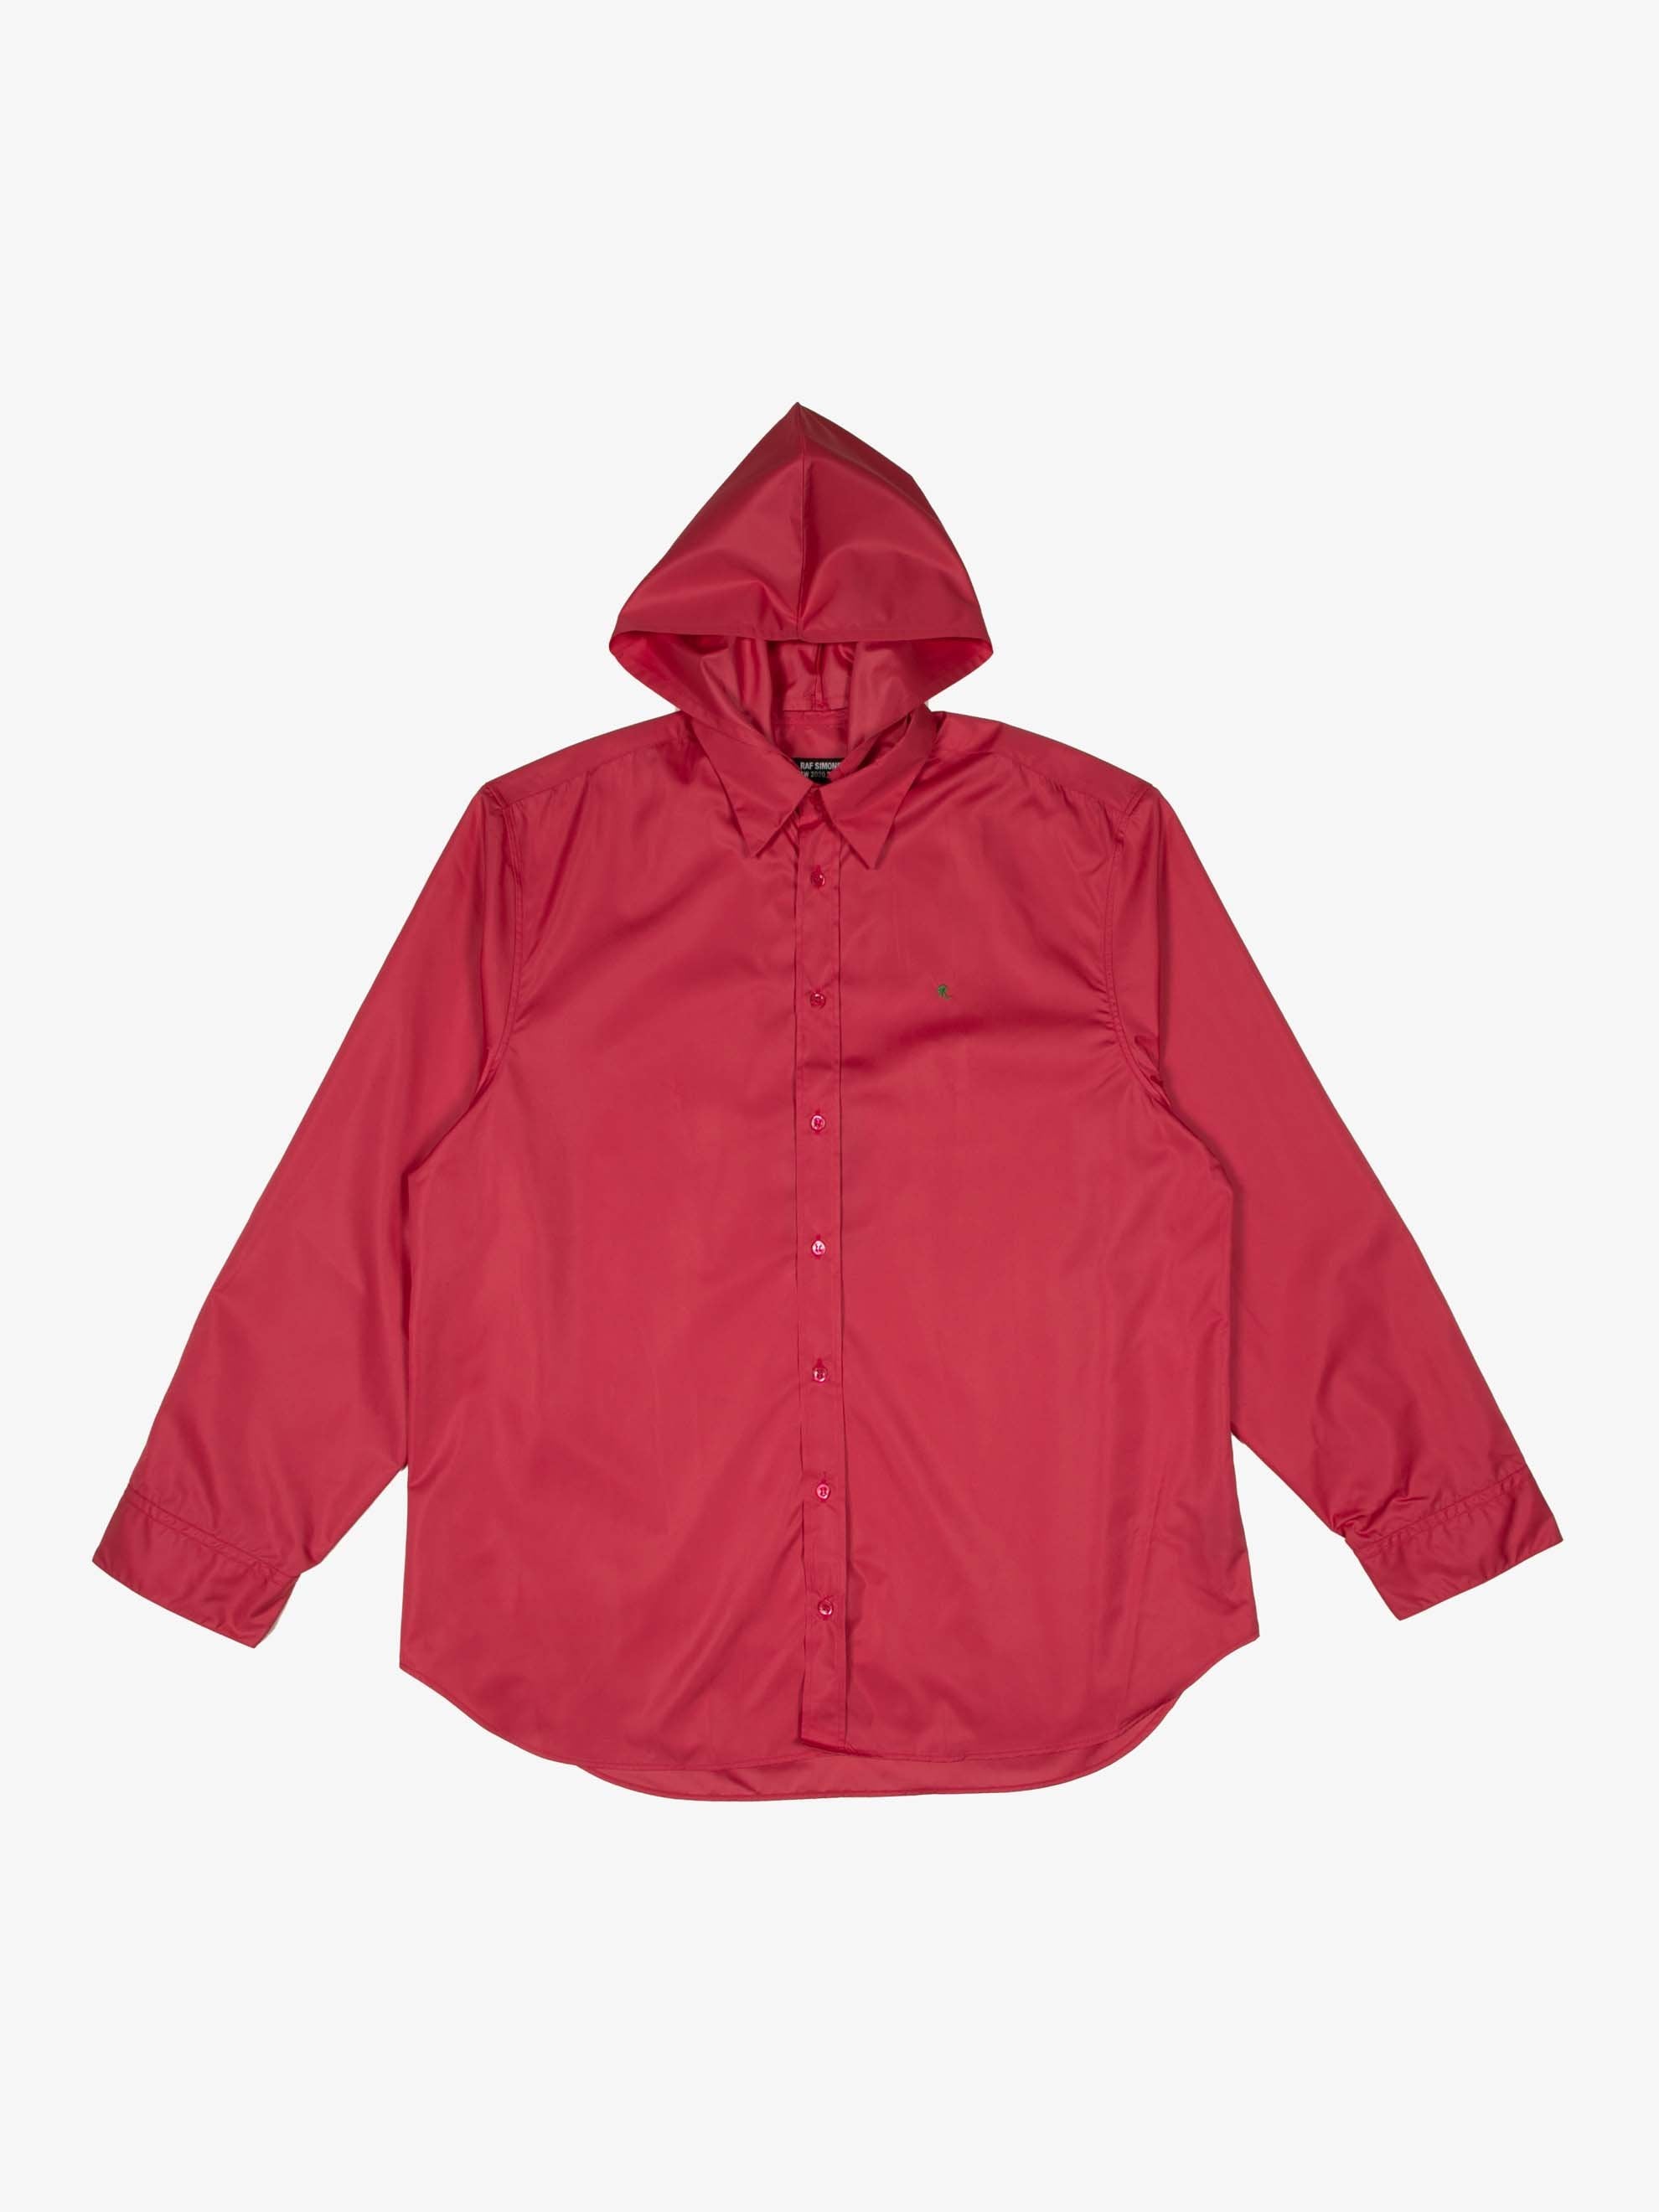 Big Fit Hooded R-Shirt (Pink)